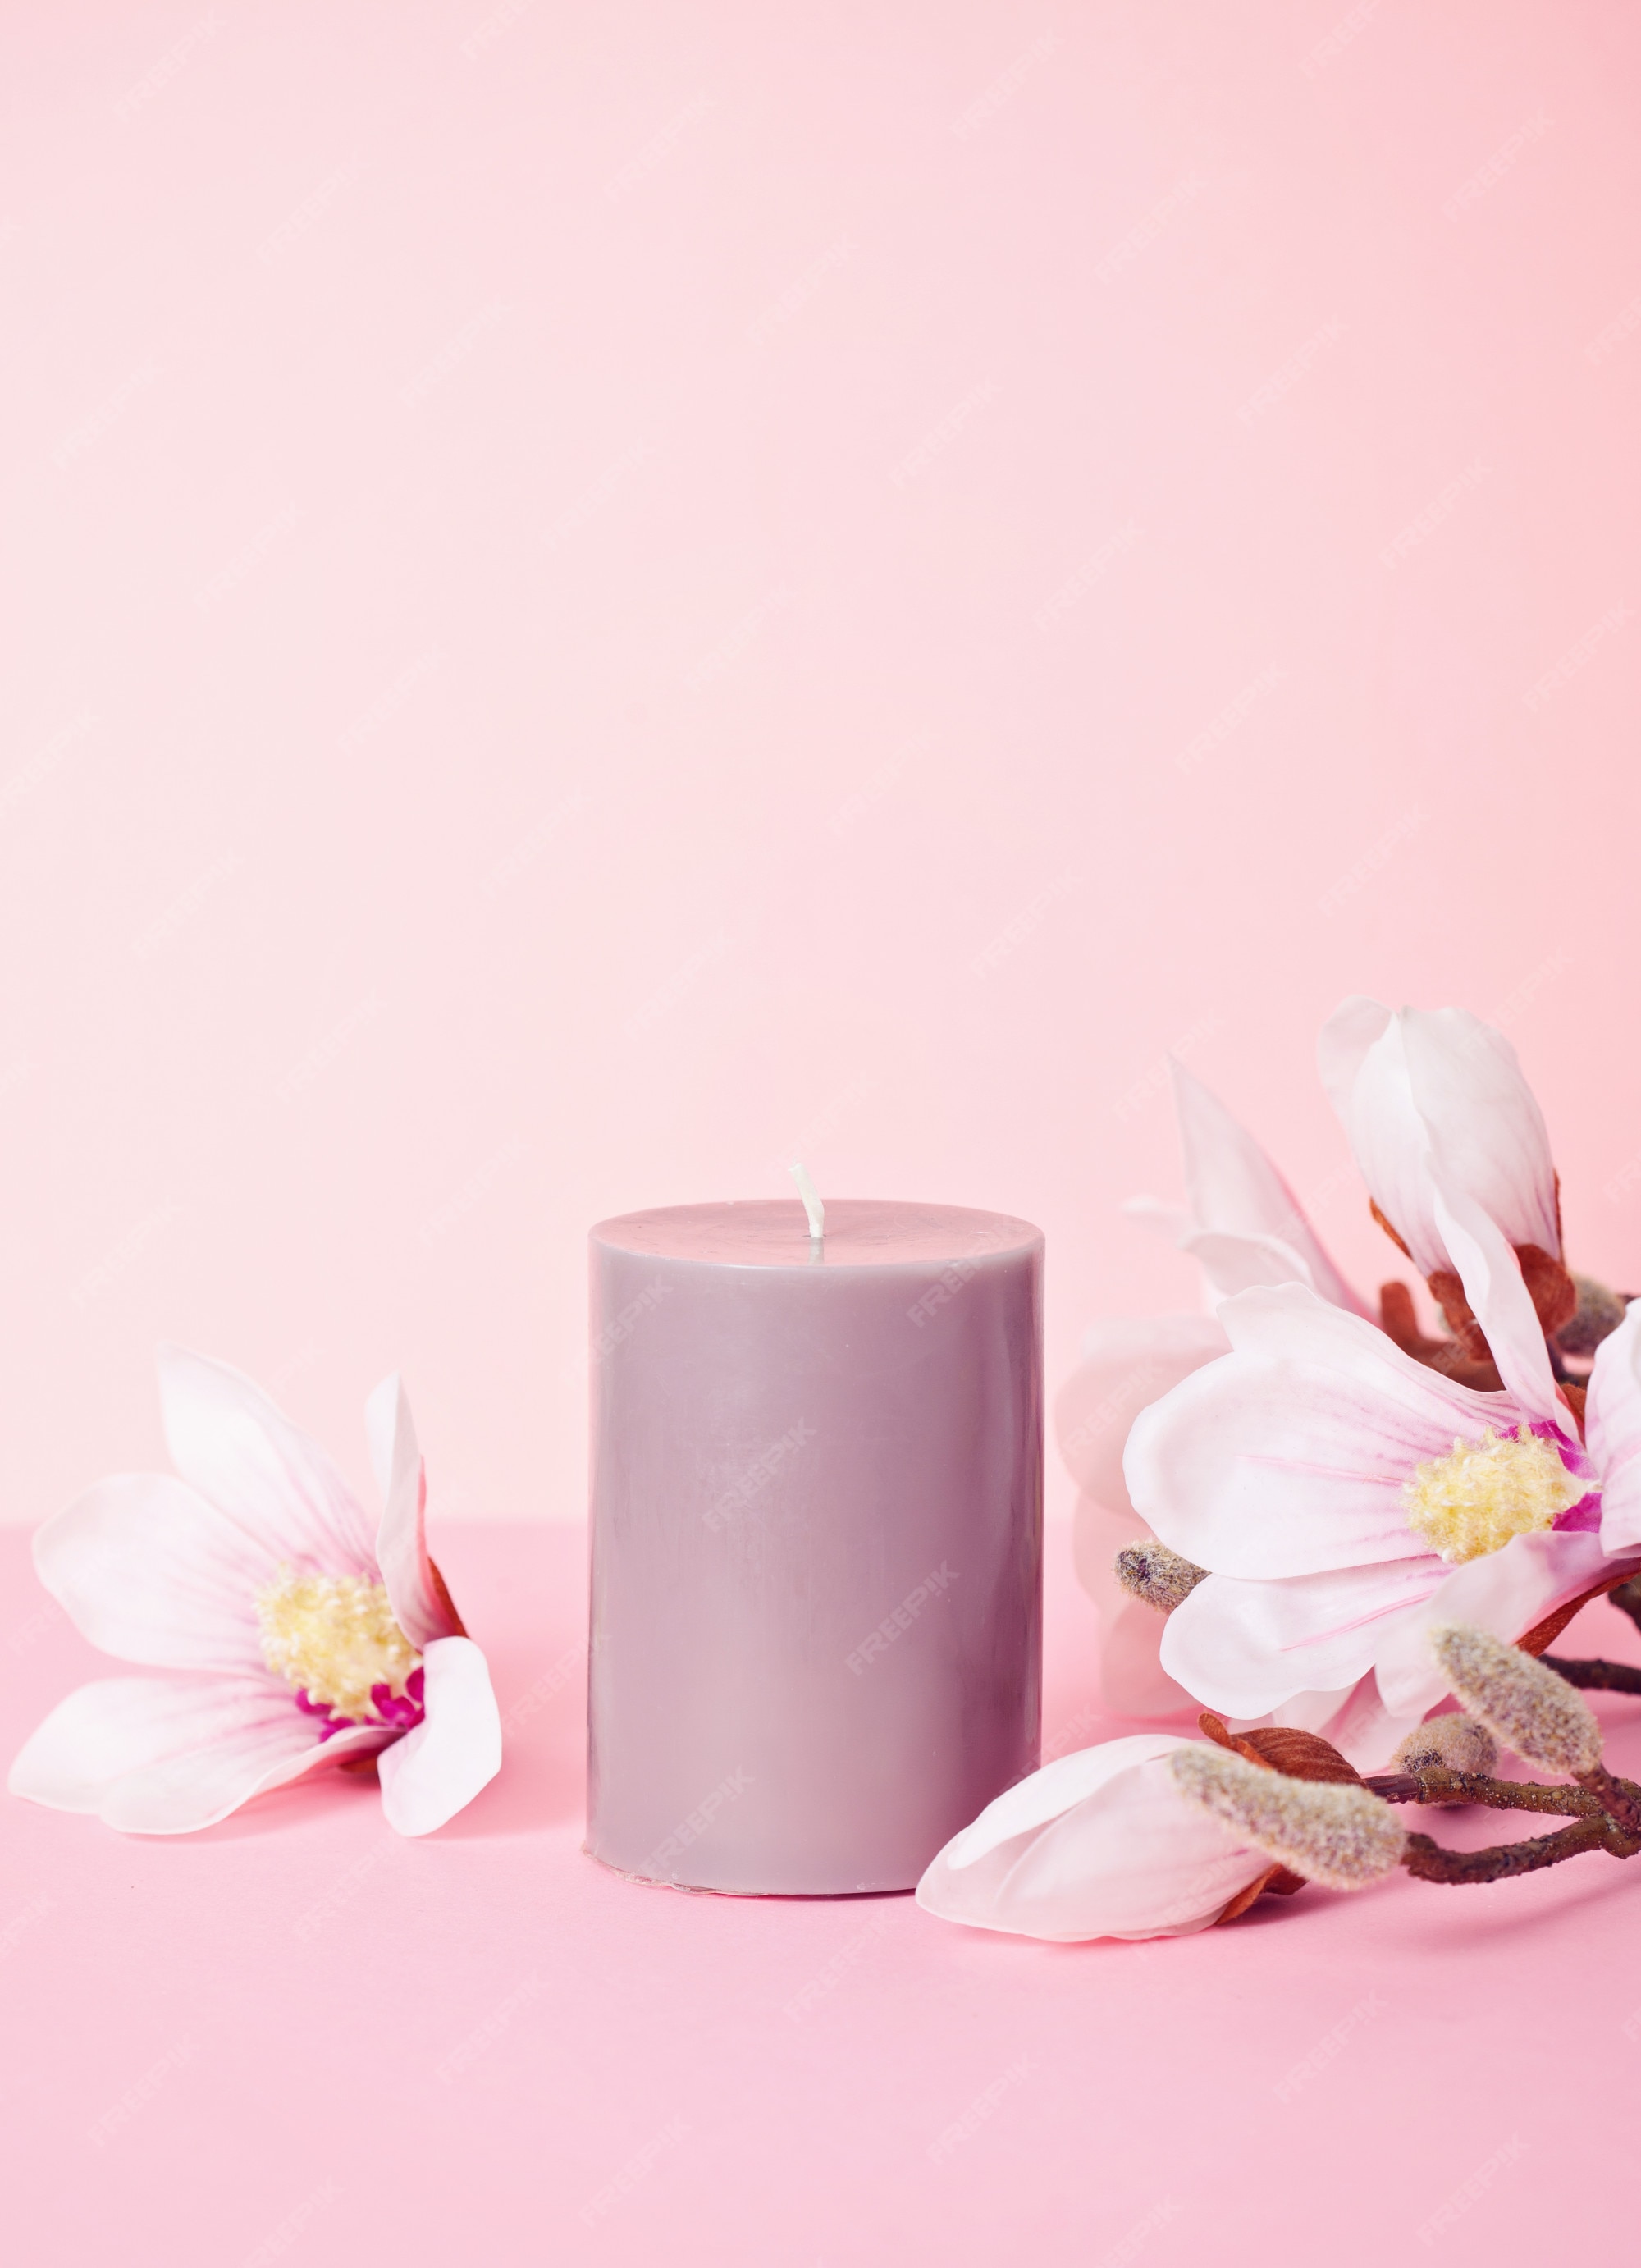 PINK ROSE BUDS QUALITY PREMIUM - Eco Candle Project